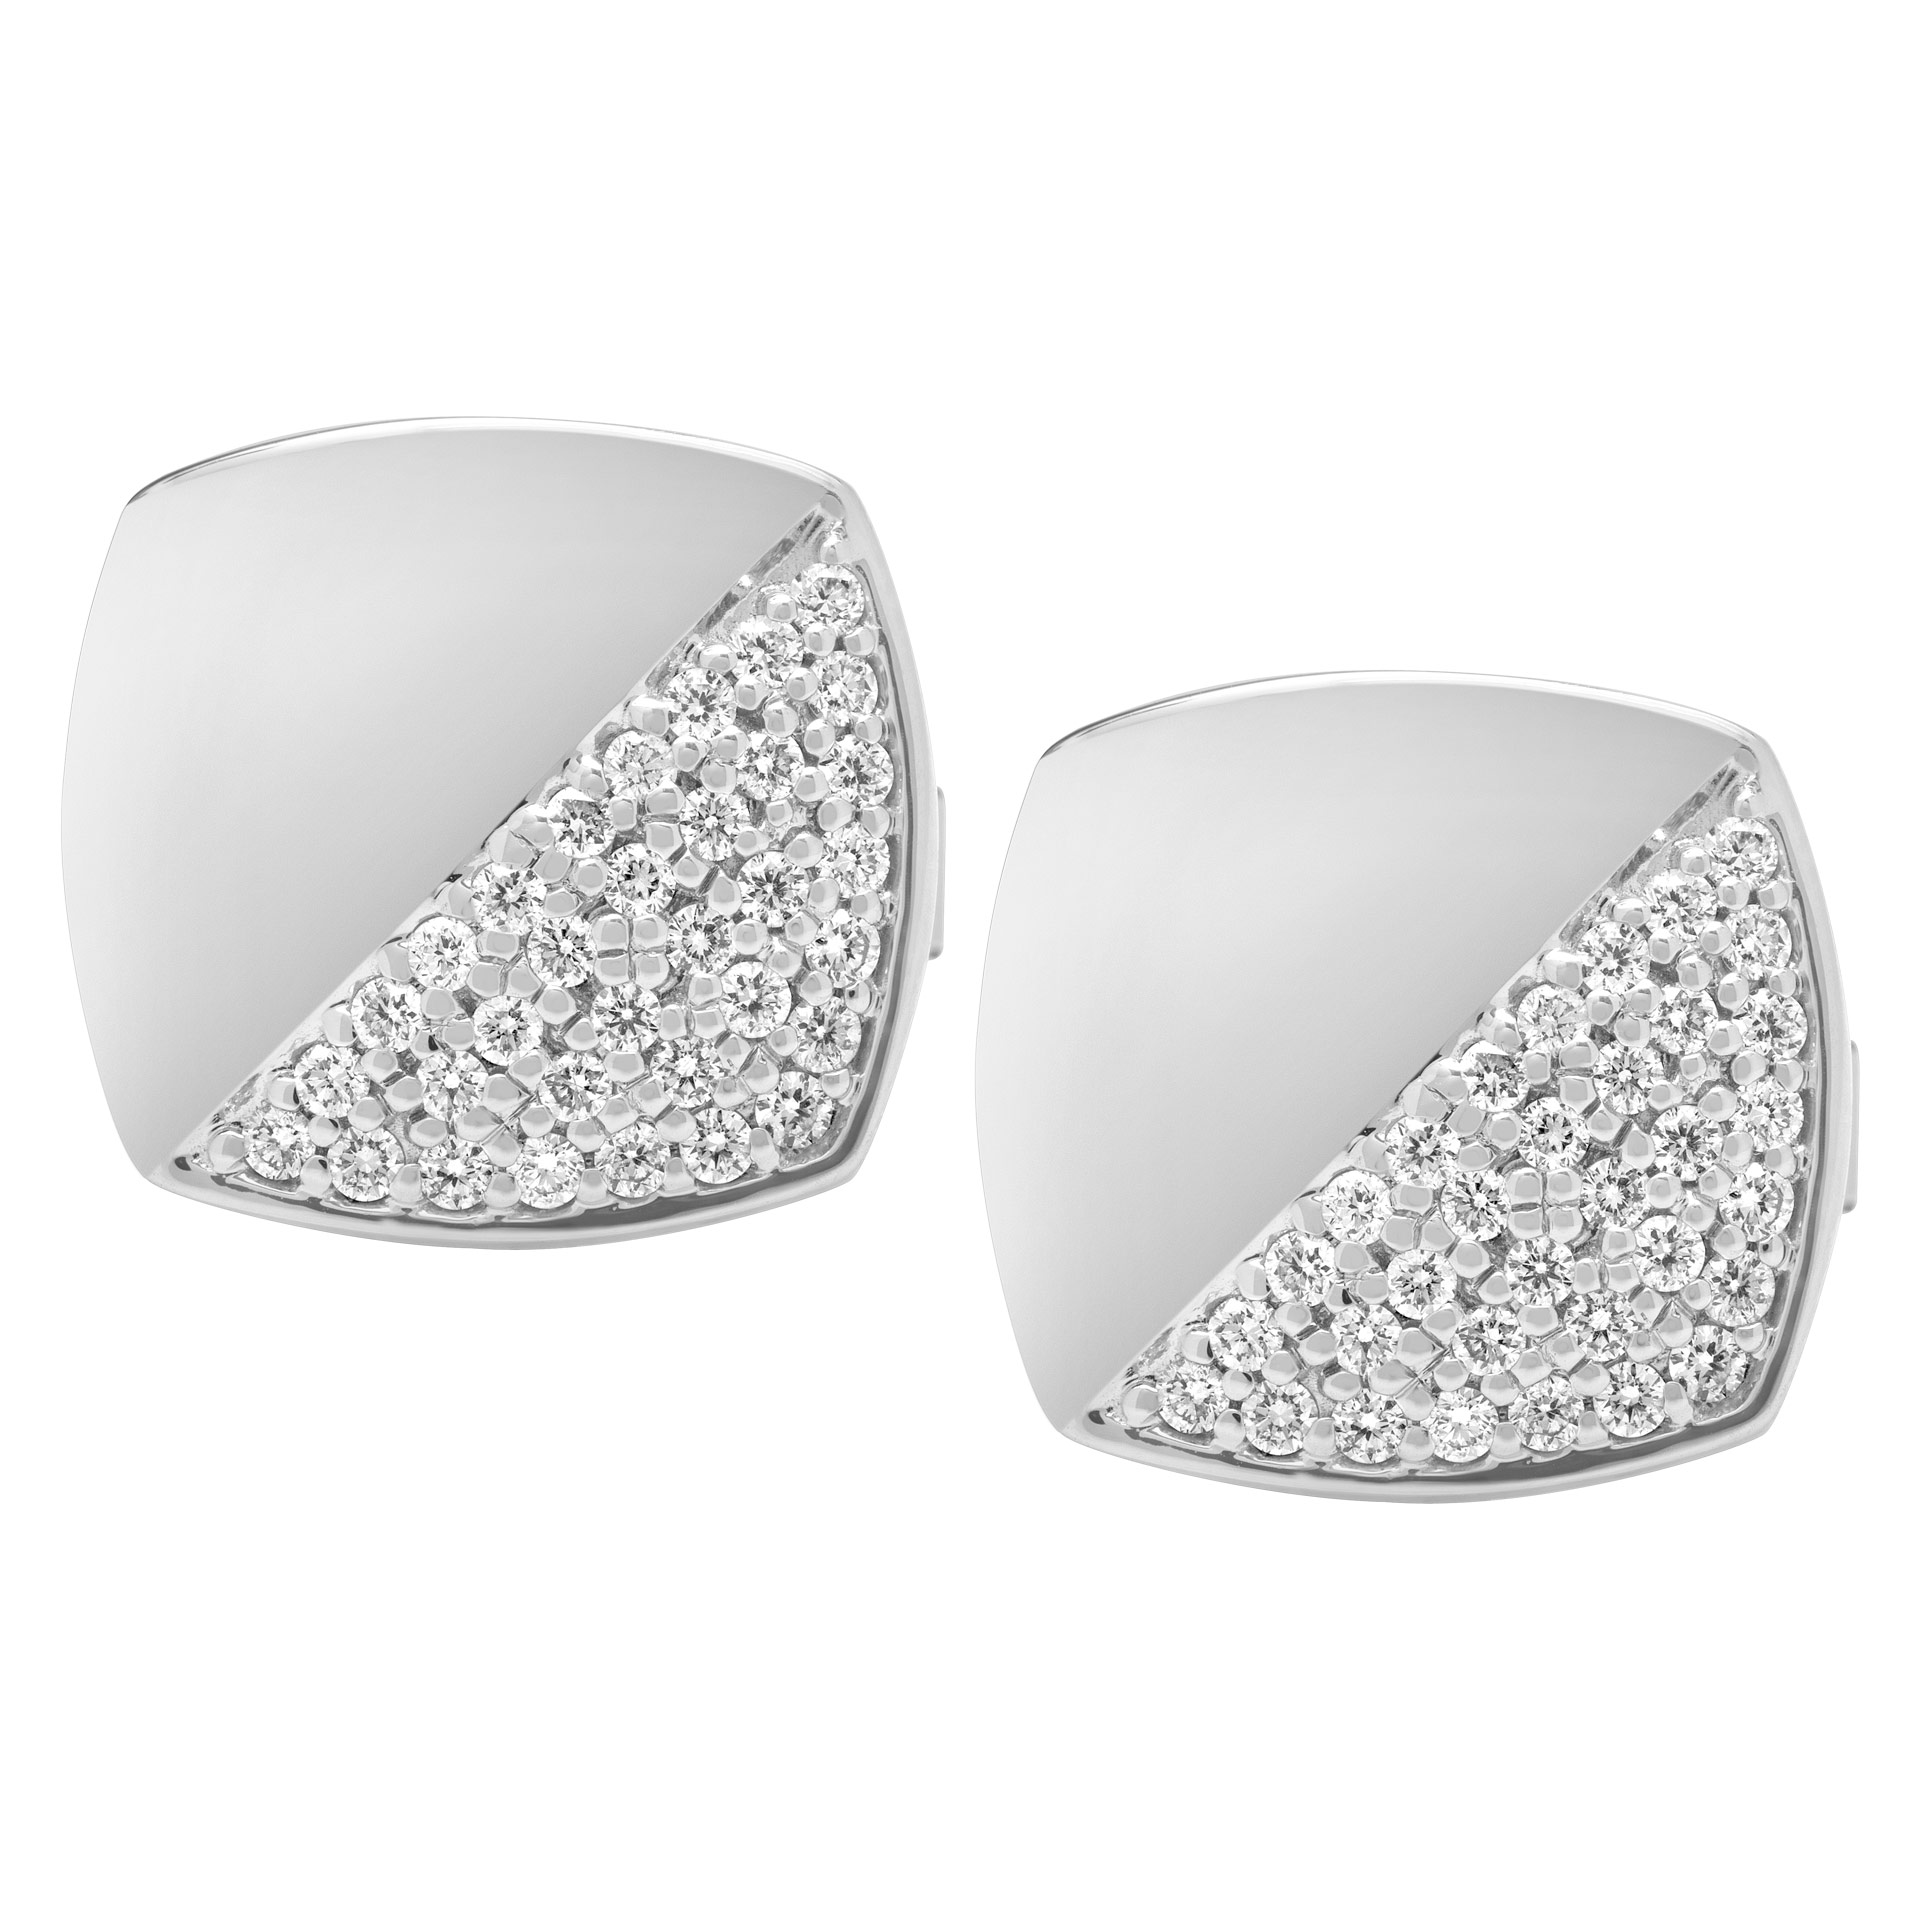 New square 18k white gold cufflinks with pave set diamonds. 1.07 carats